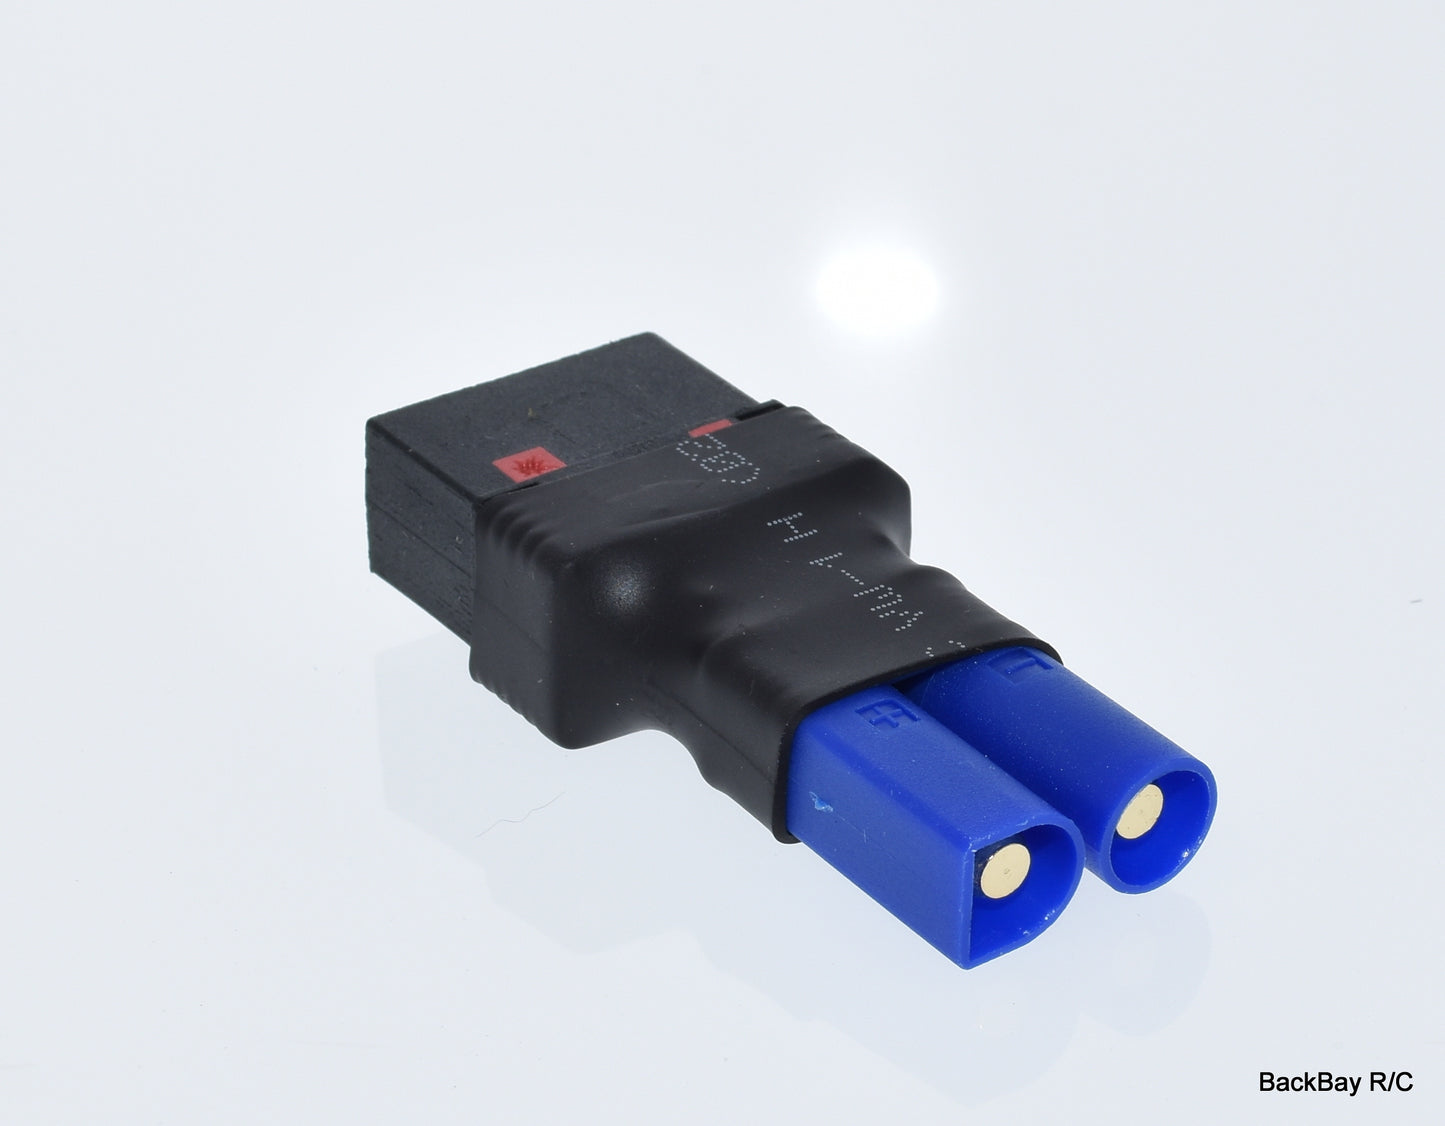 EC5 Male to Female QS8-S Adapter - No Wires Adapter